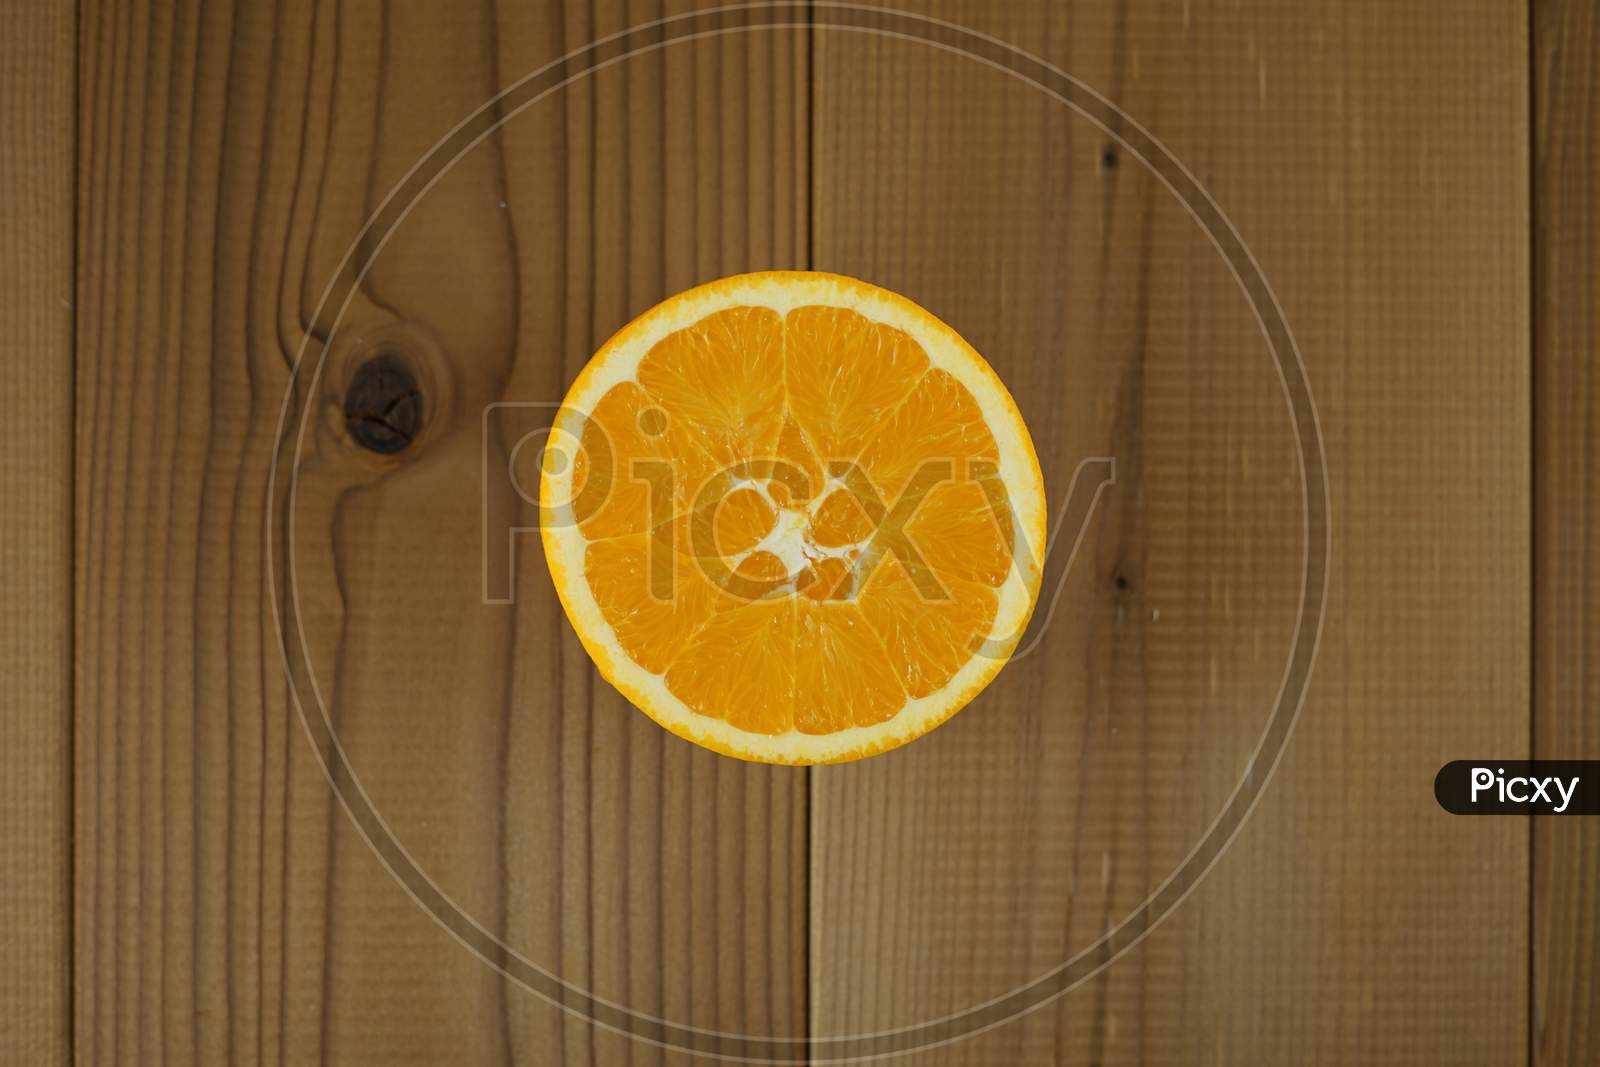 Orange Image Placed In The Table